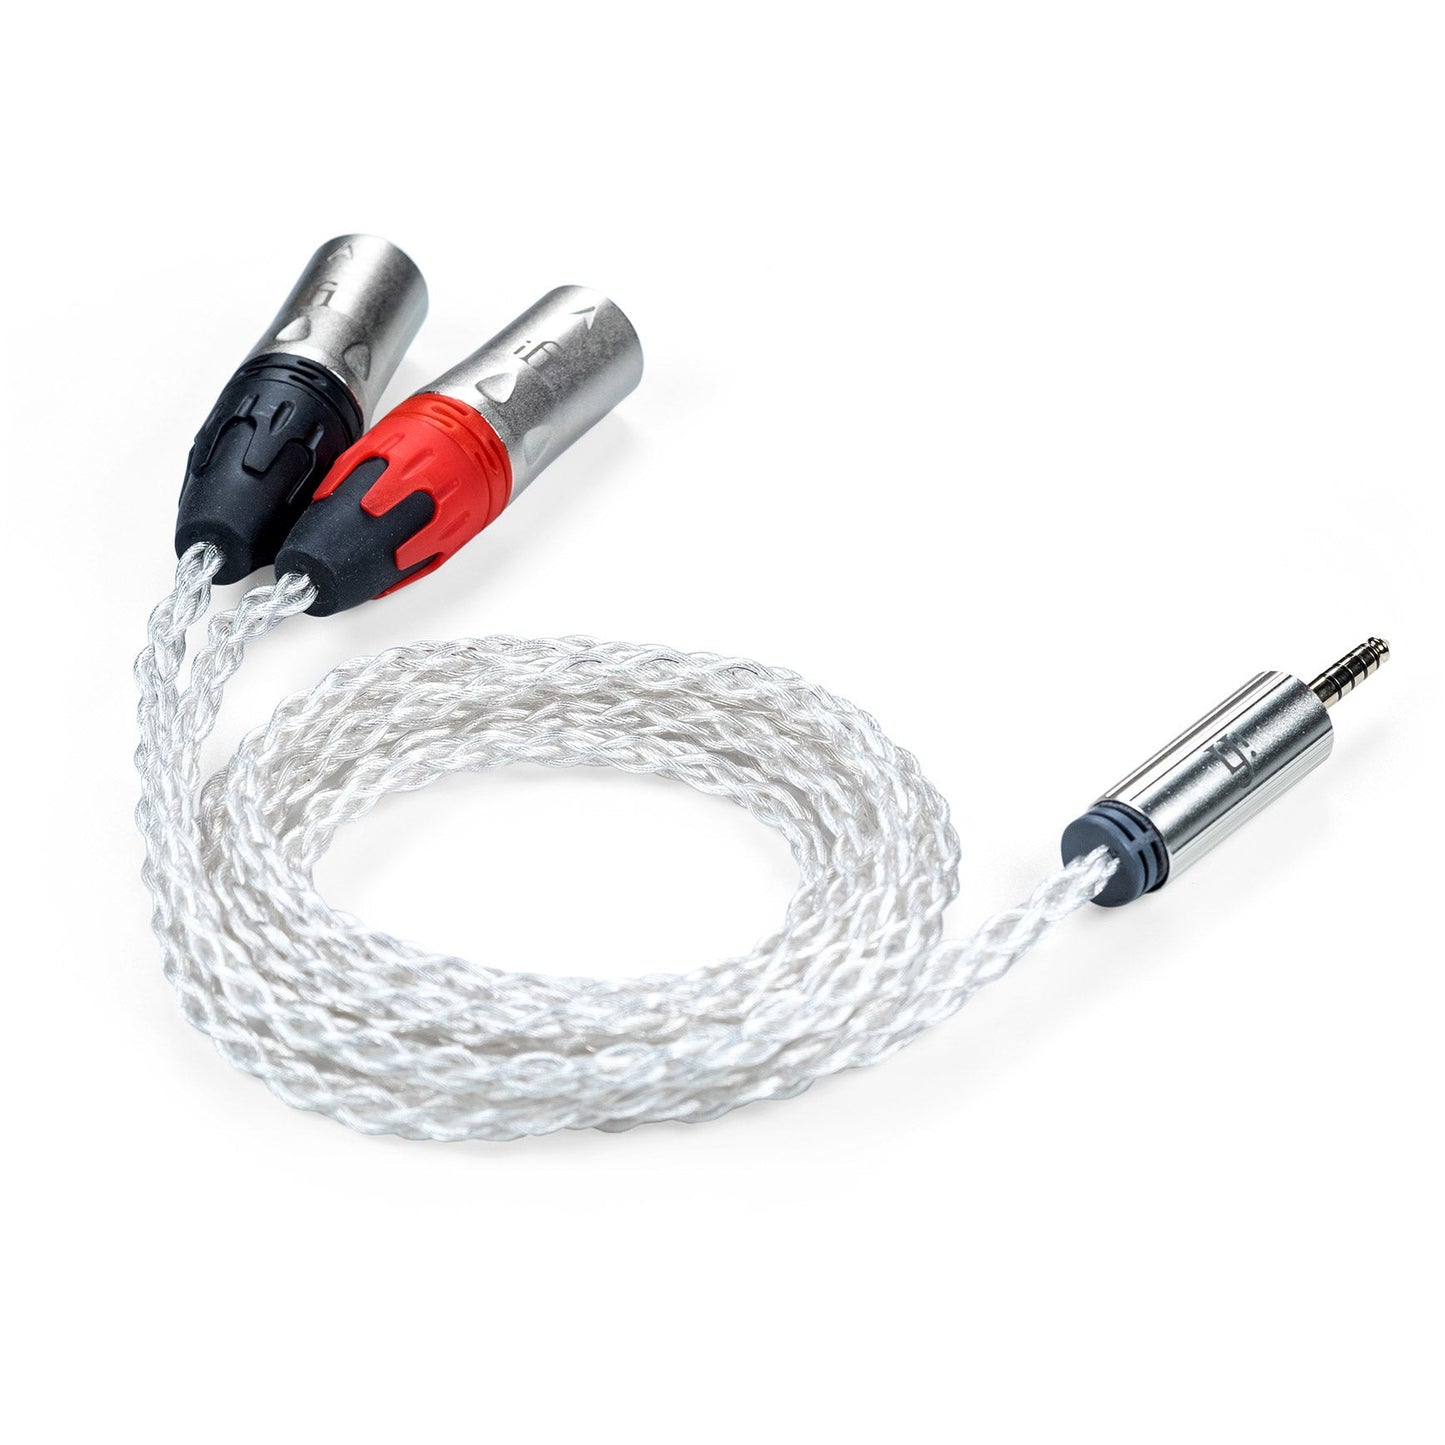 Ifi 4.4 > XLR Cable